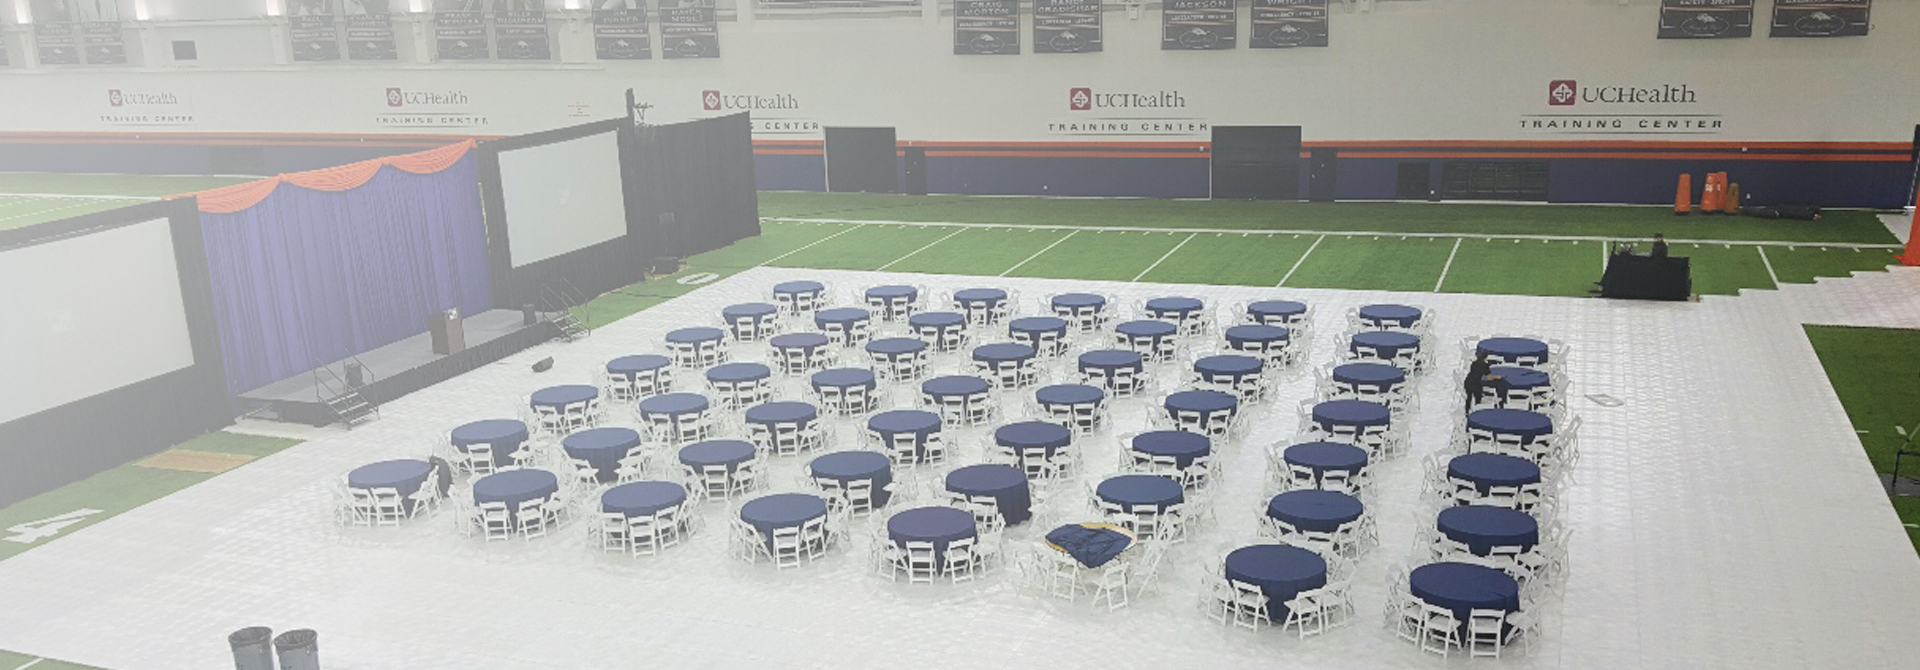 Turf protection for Denver Broncos field